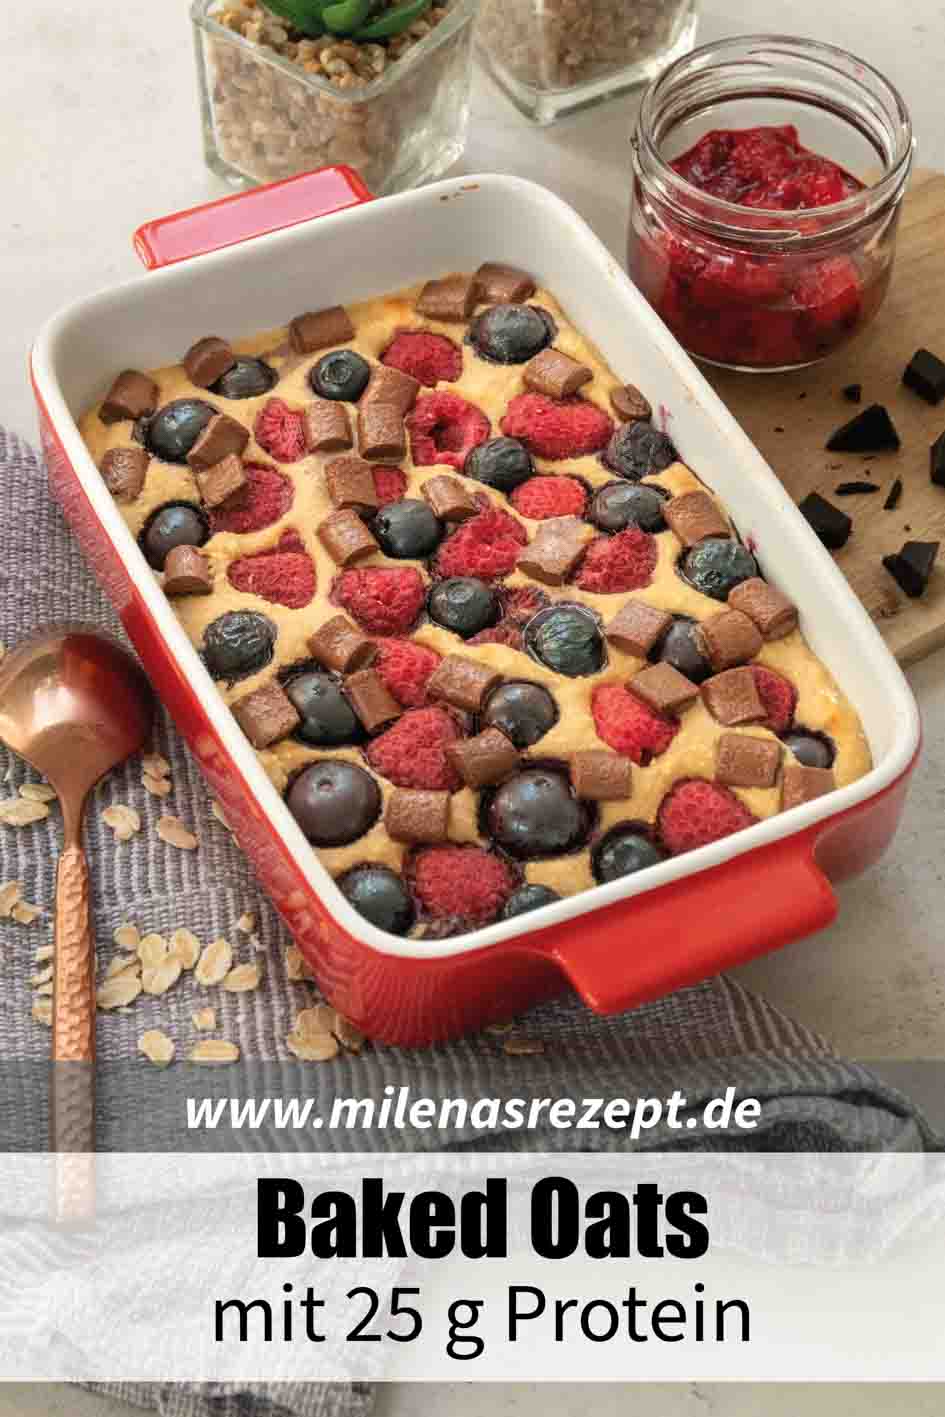 Pin - Baked Oats mit Protein